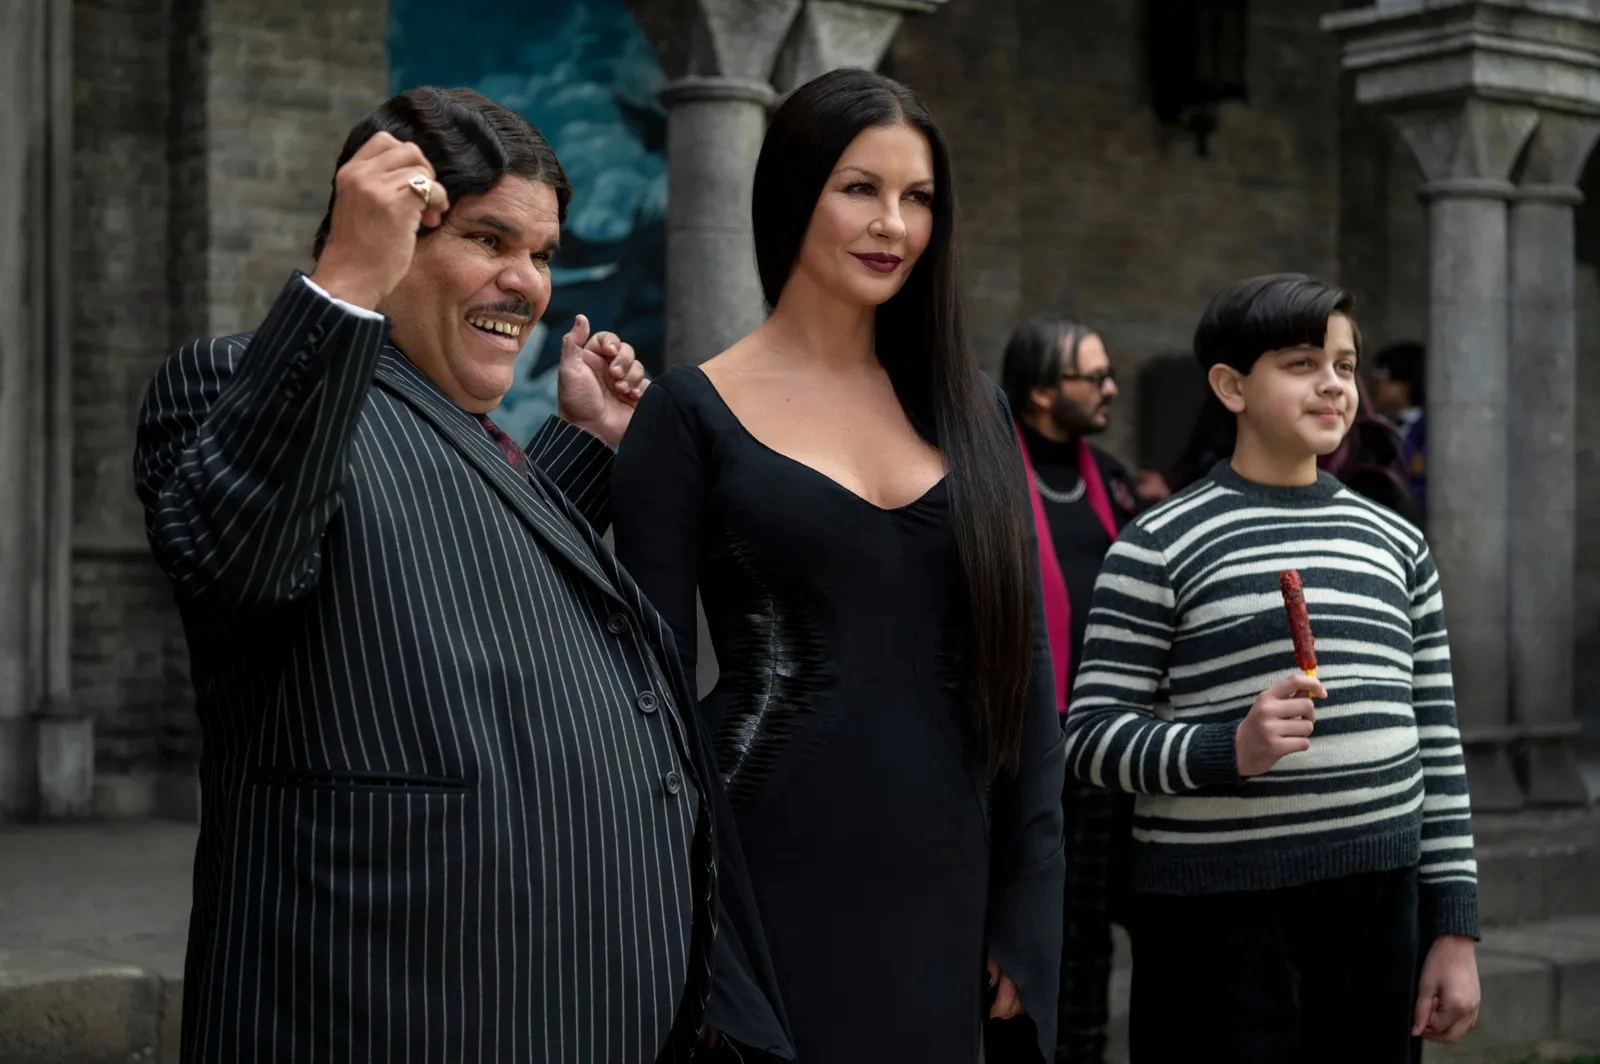 Isaac Ordonez’s Wiki: All About ‘Wednesday’ Actor Who Played Pugsley Addams